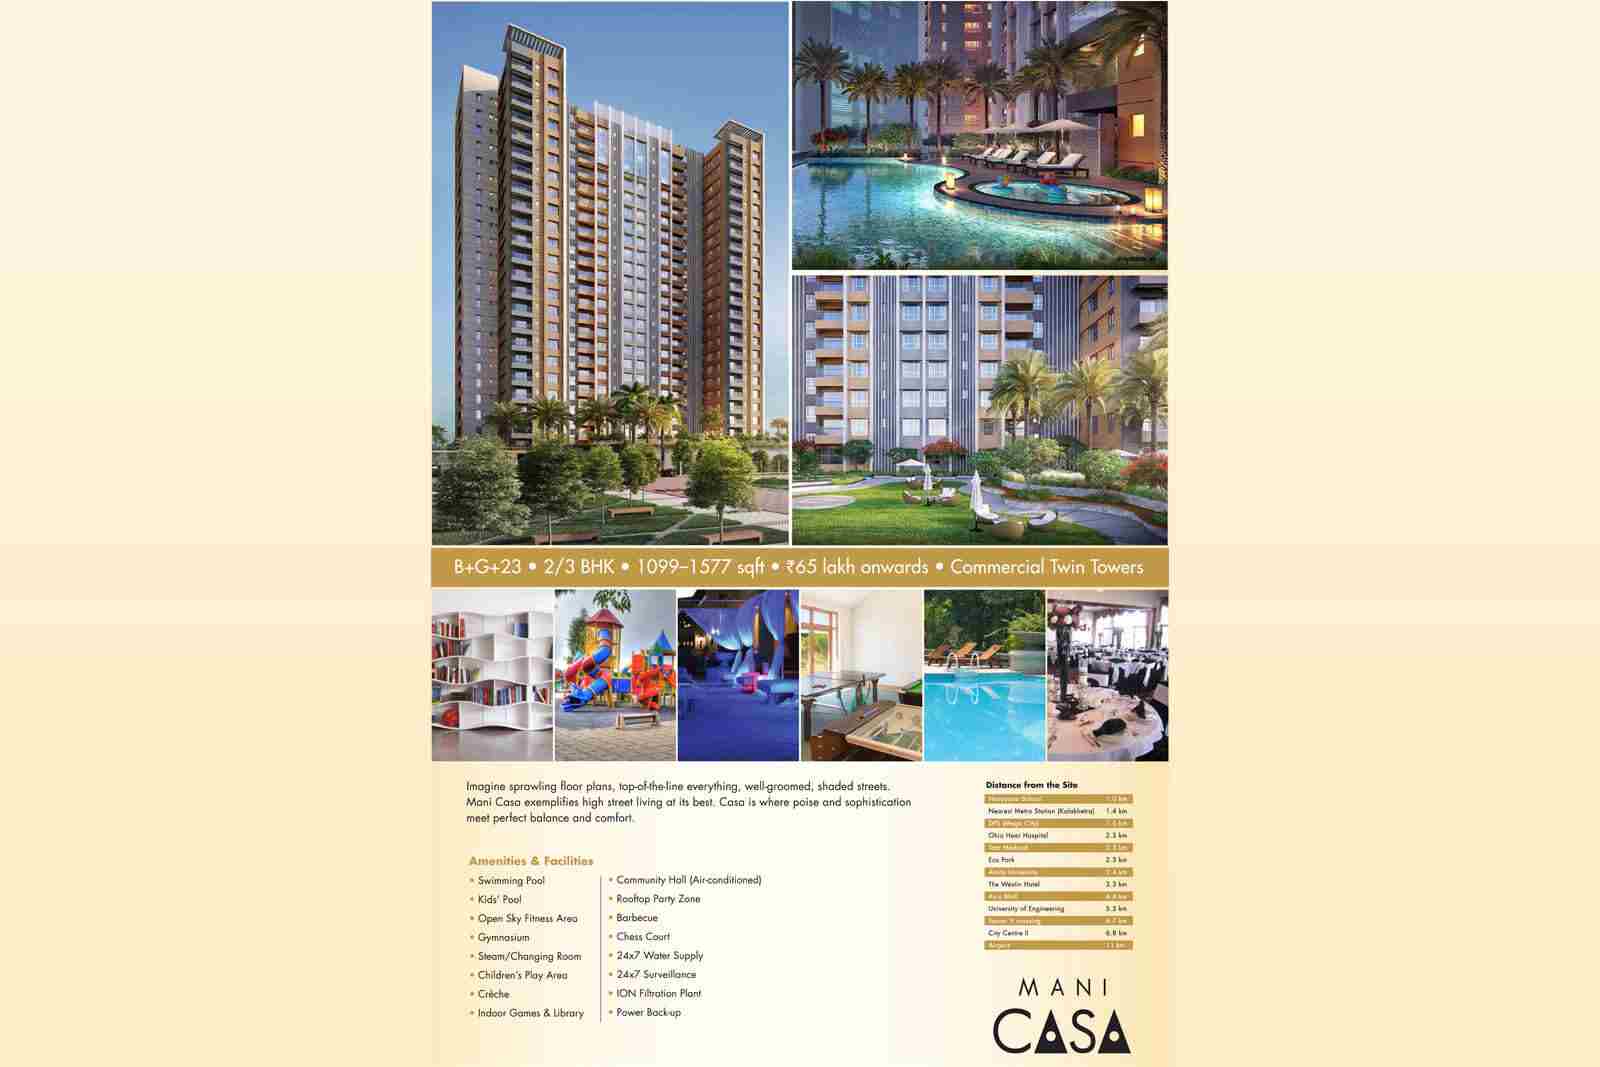 You can live in excellent abode with comfort at Mani Casa in Kolkata